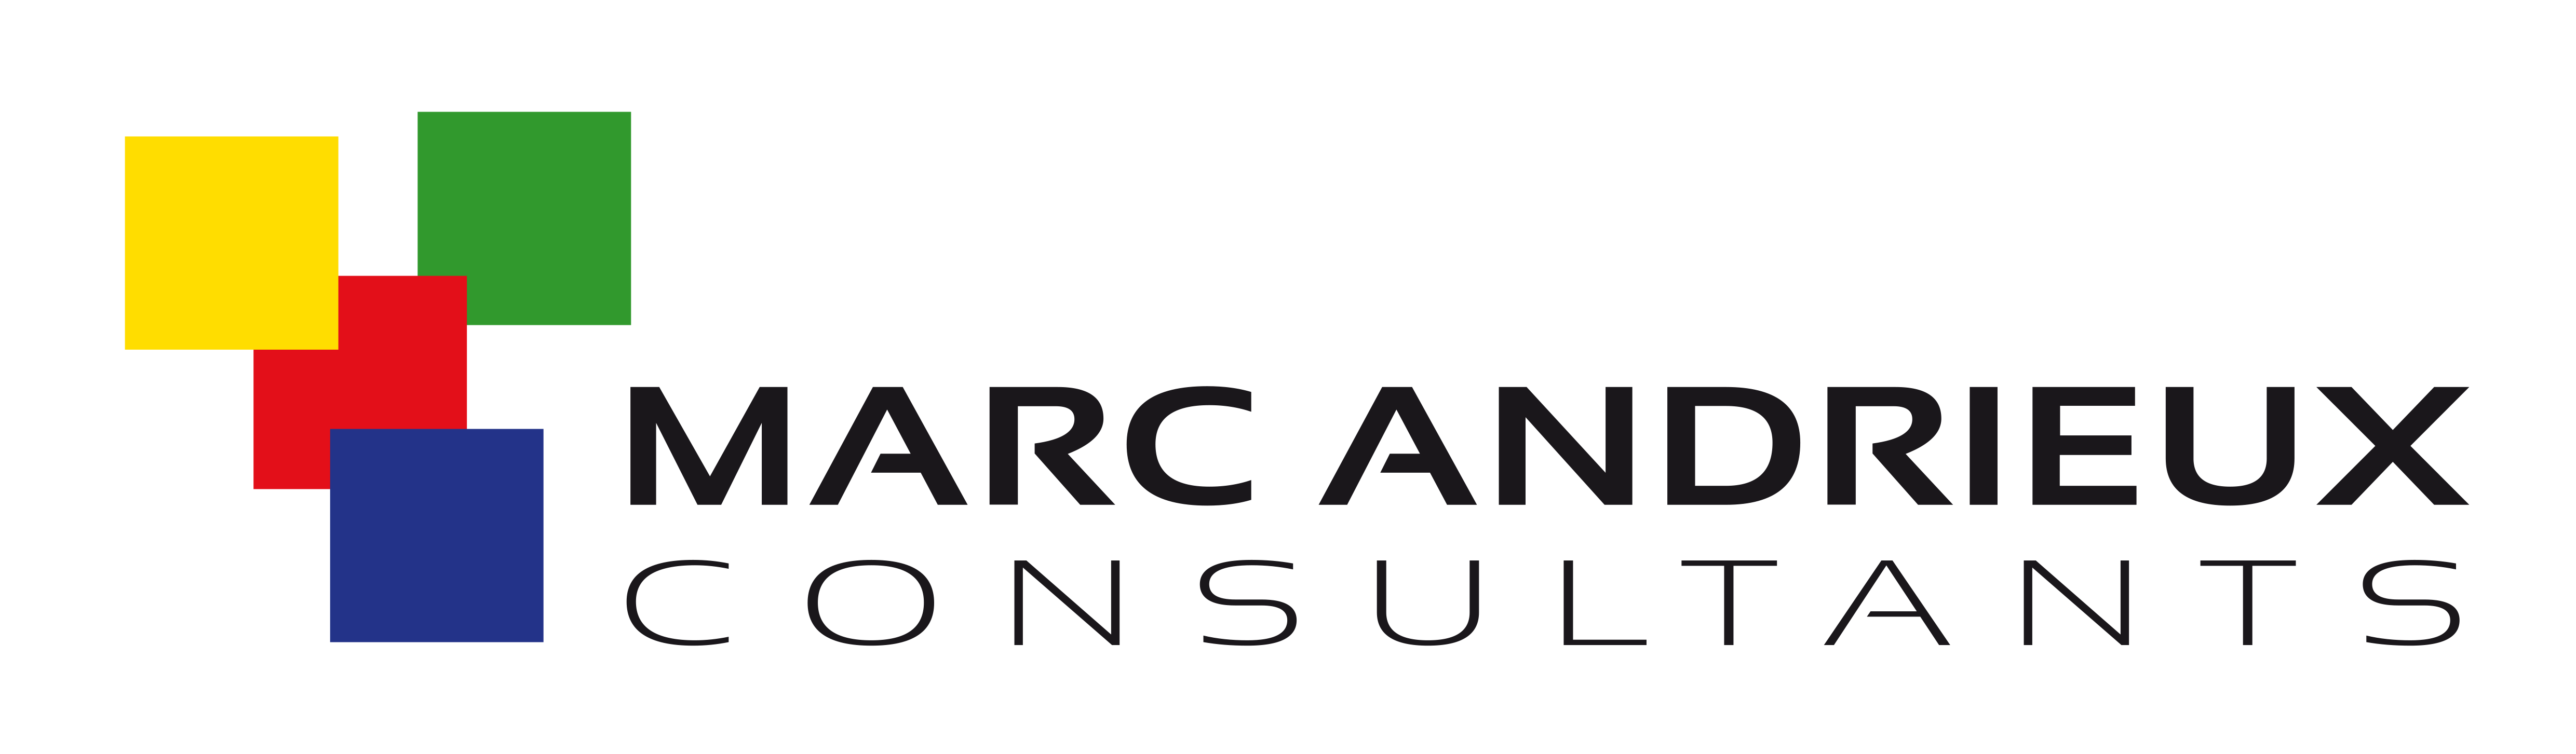 marc andrieux consultants